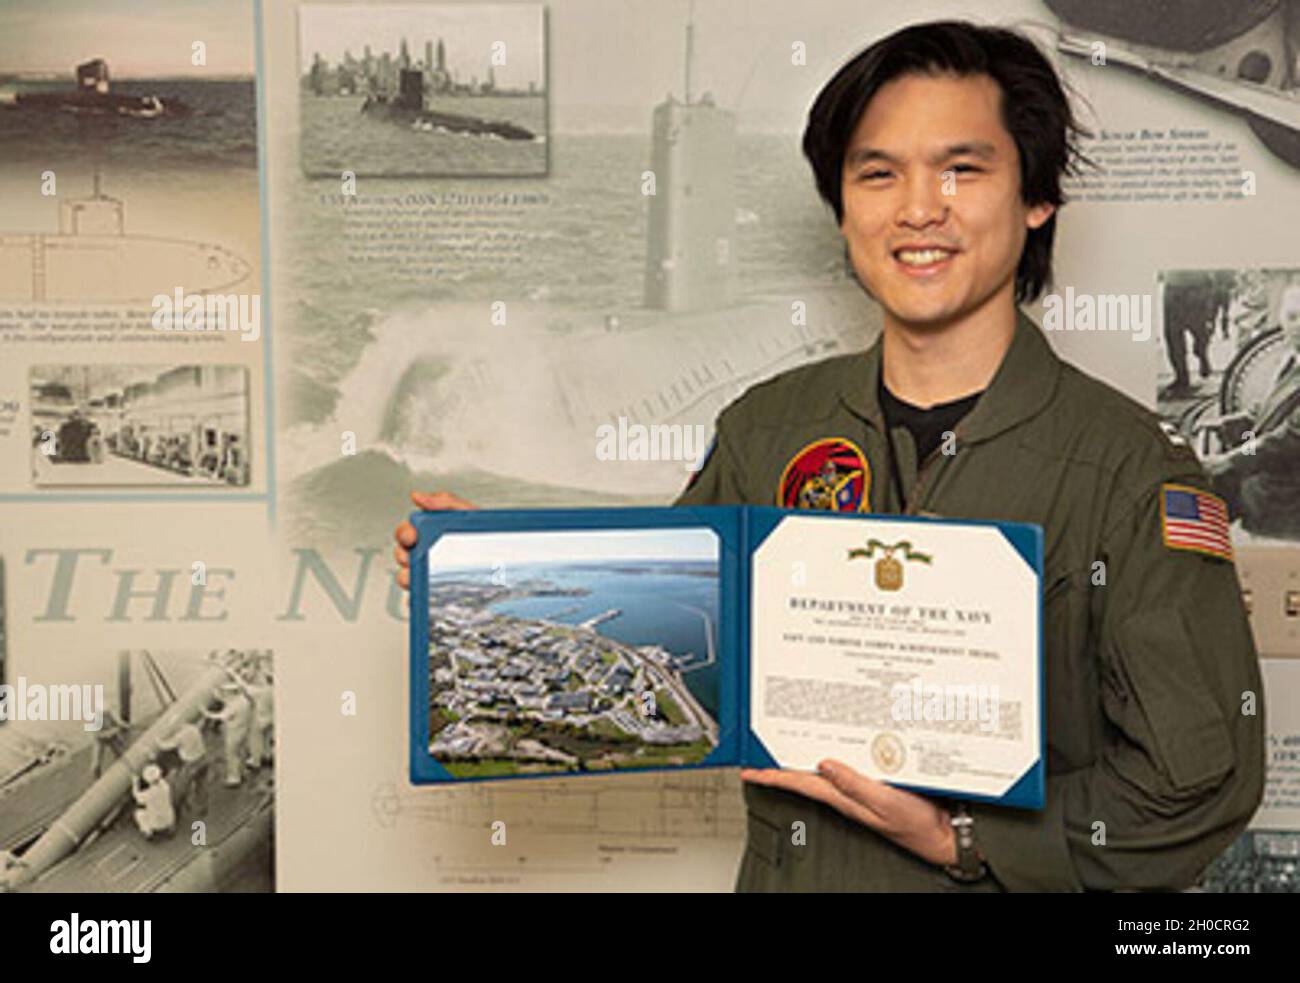 Lt. Winston Dang, who served as the COVID-19 contact tracing lead for the Naval Undersea Warfare Center Division Newport from April to October 2020, received the Navy and Marine Corps Achievement Medal on Jan. 25. Stock Photo